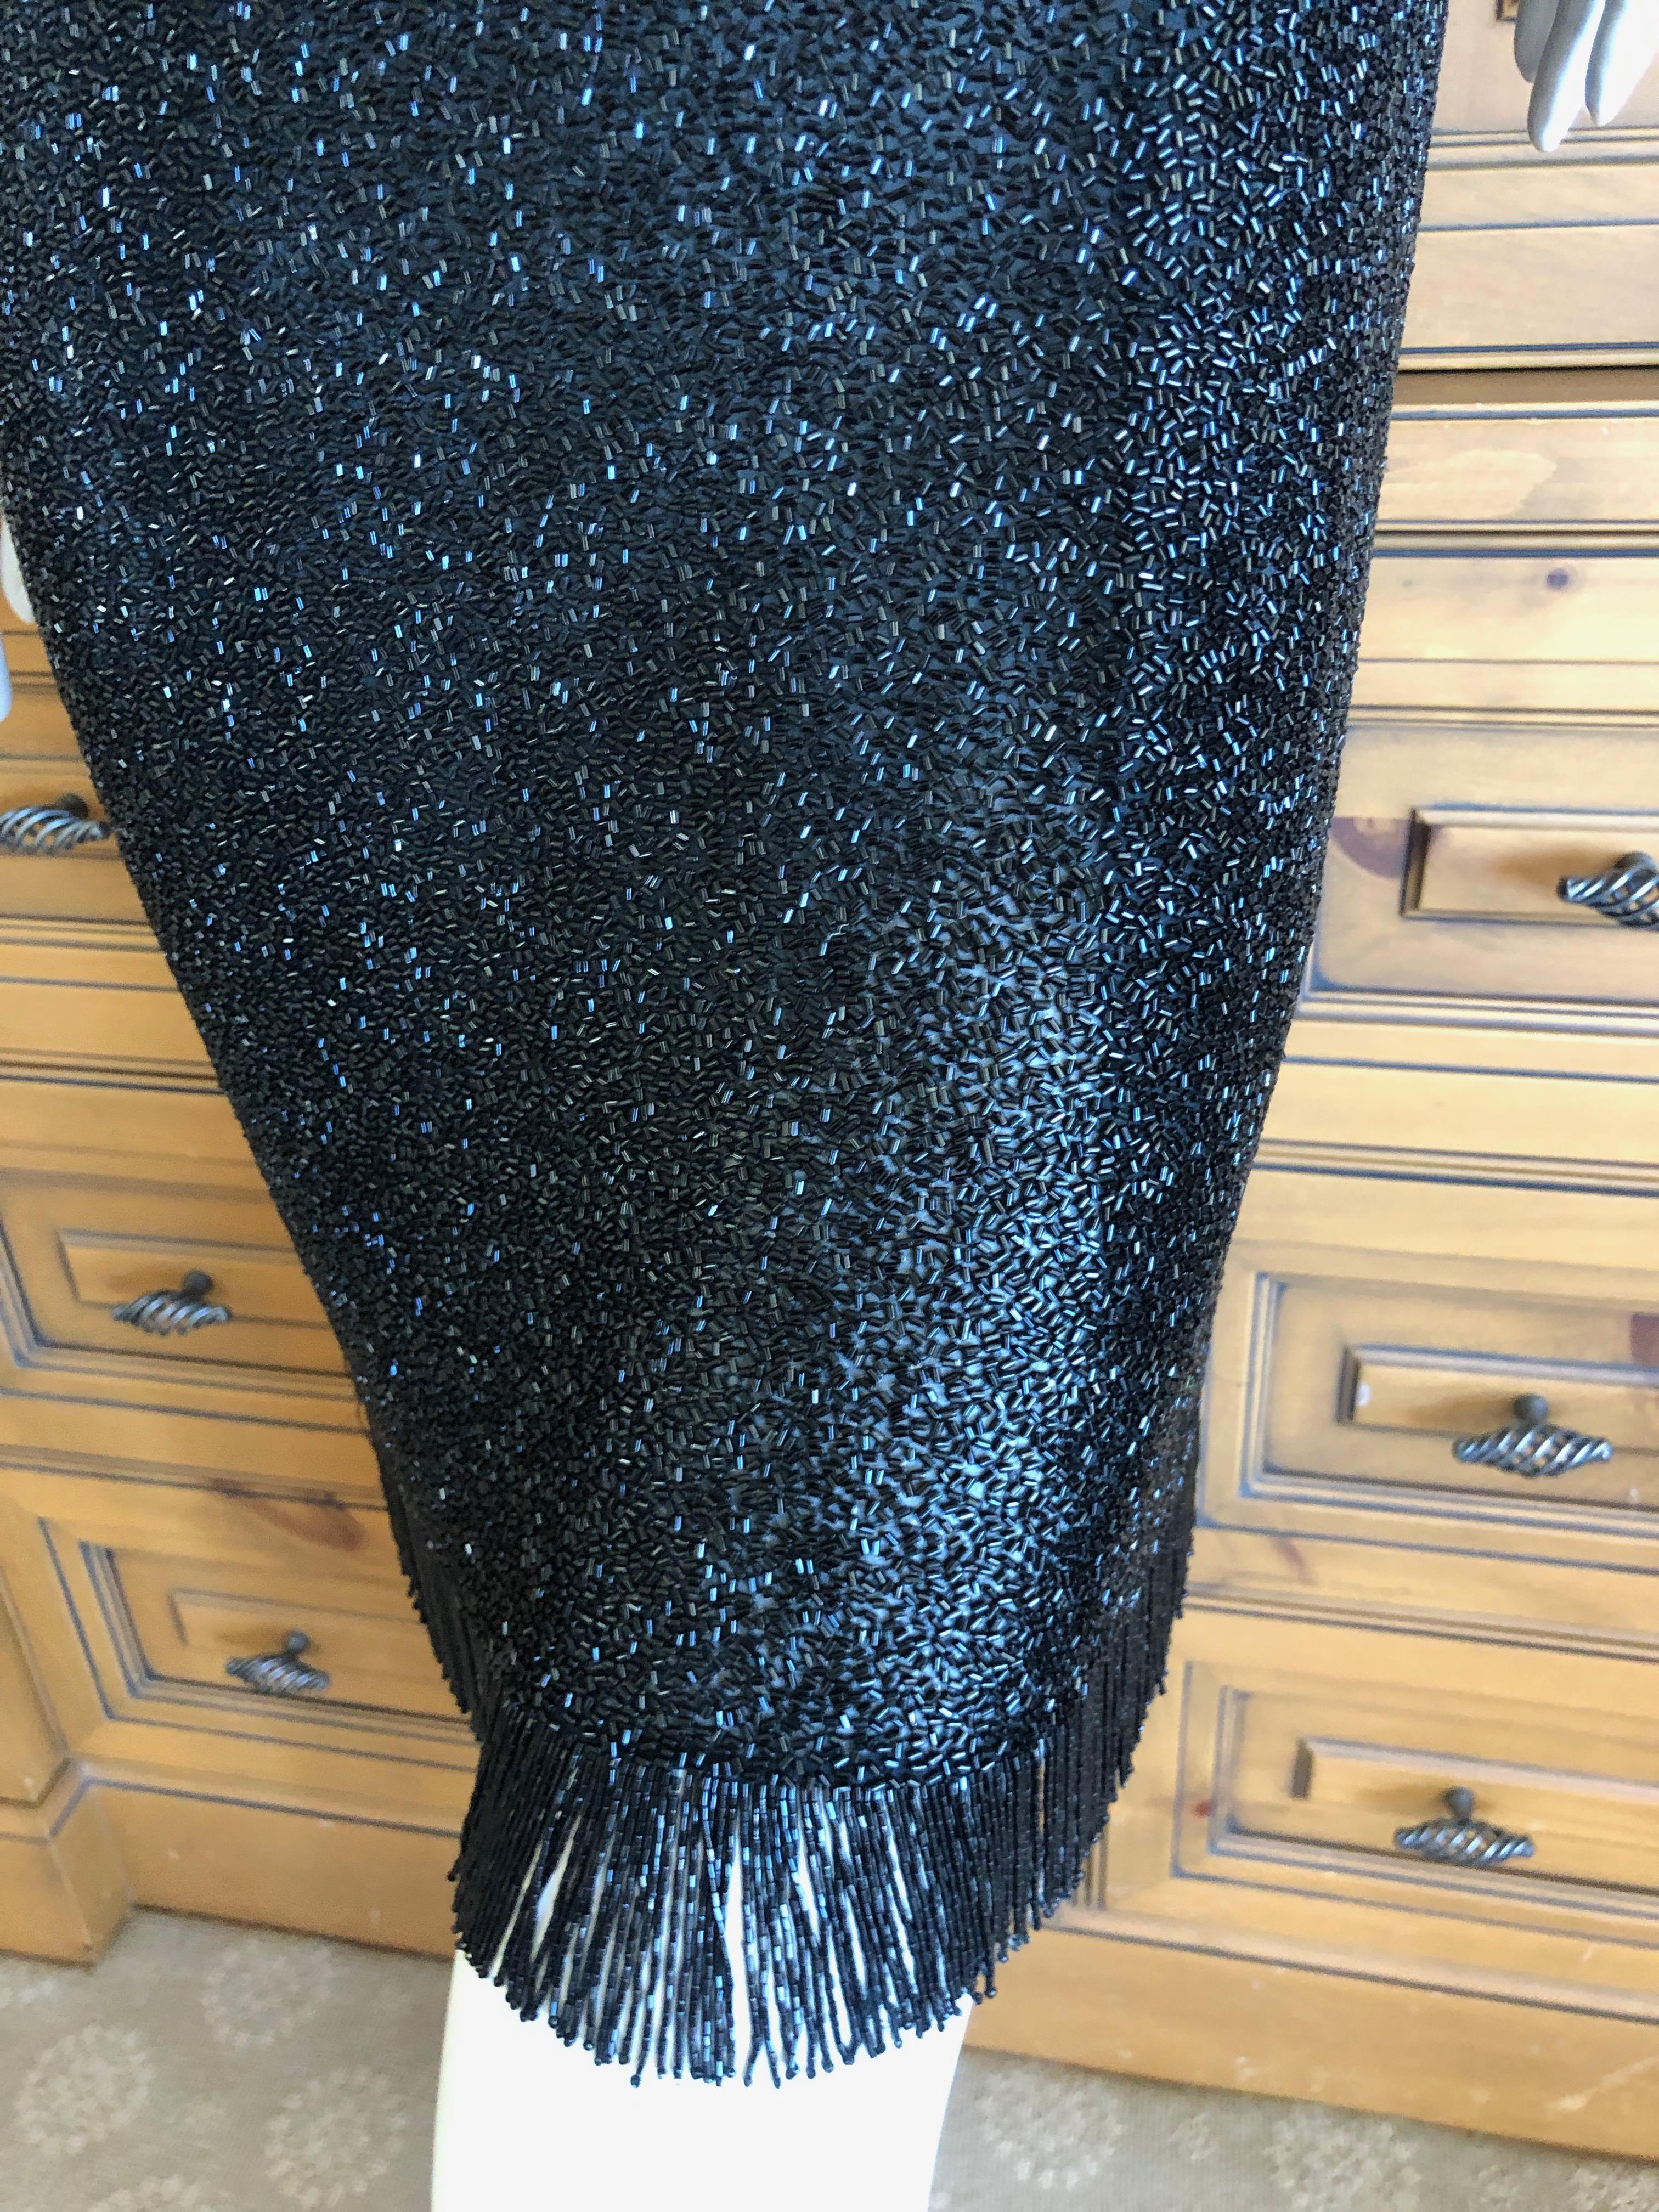 Norman Norell 1960's Black Dress Completely Embellished w Glass Beads & Fringe For Sale 4